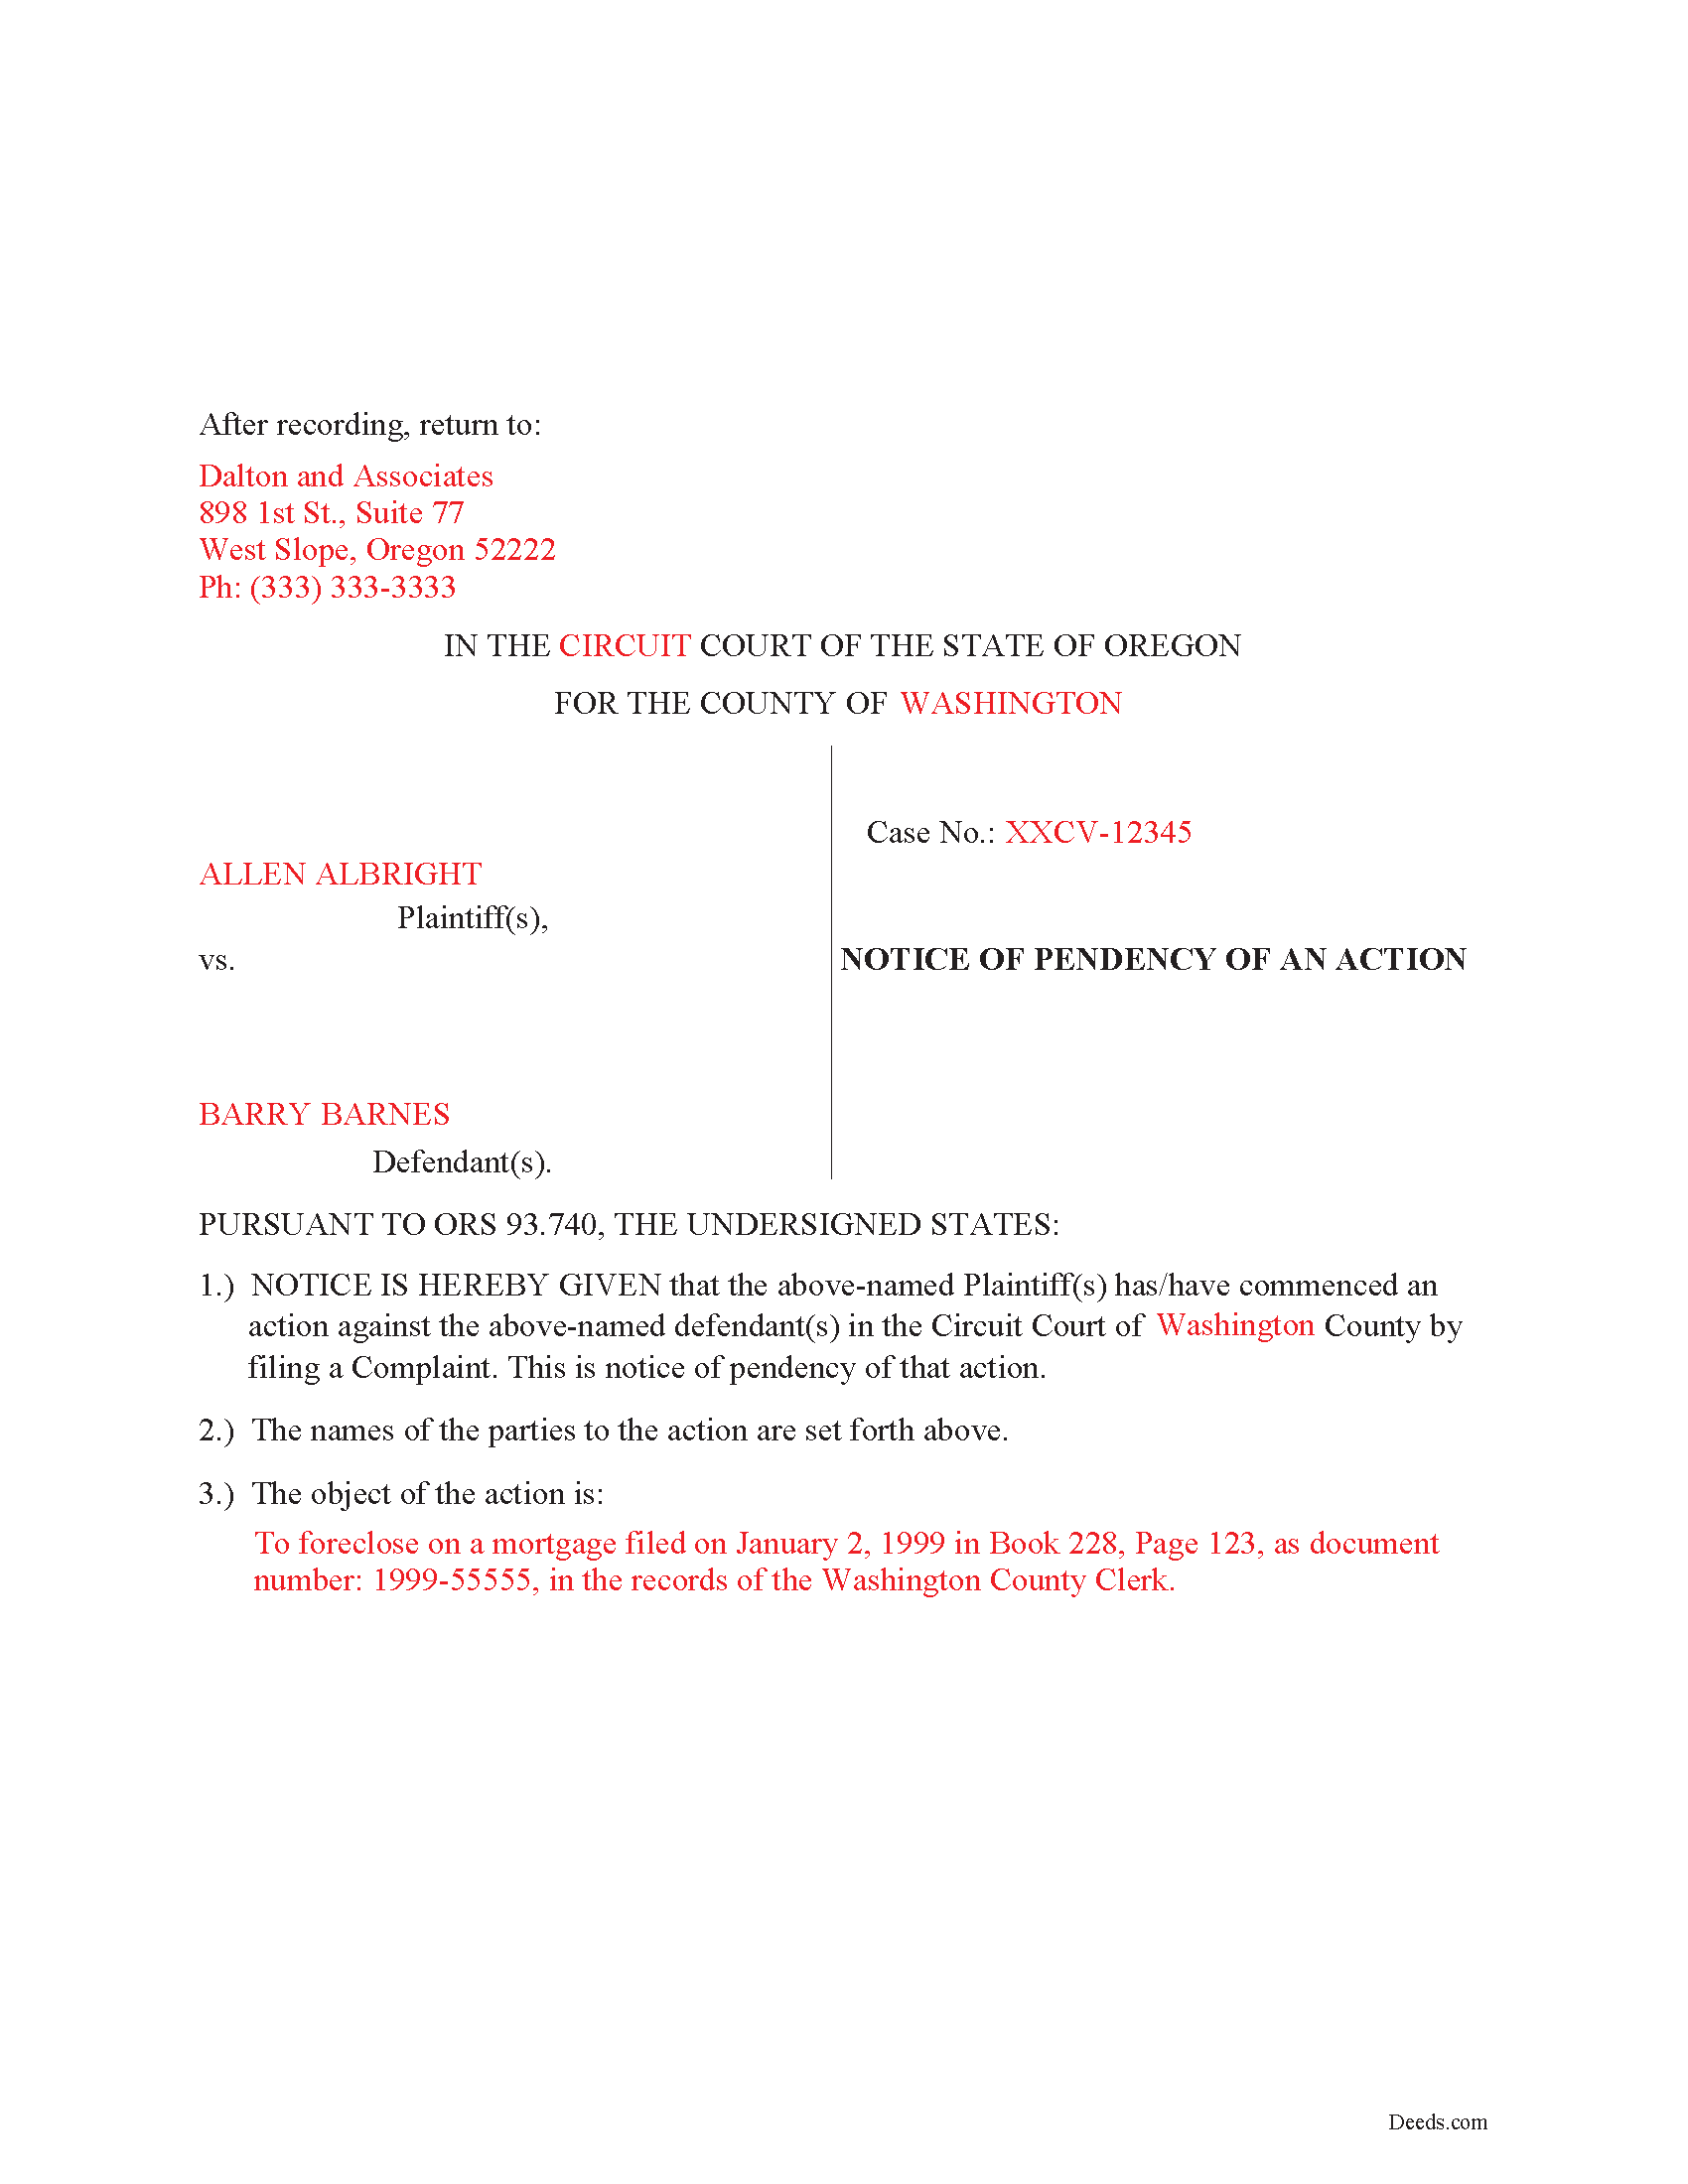 Completed Example of the Notice of Pendency Document